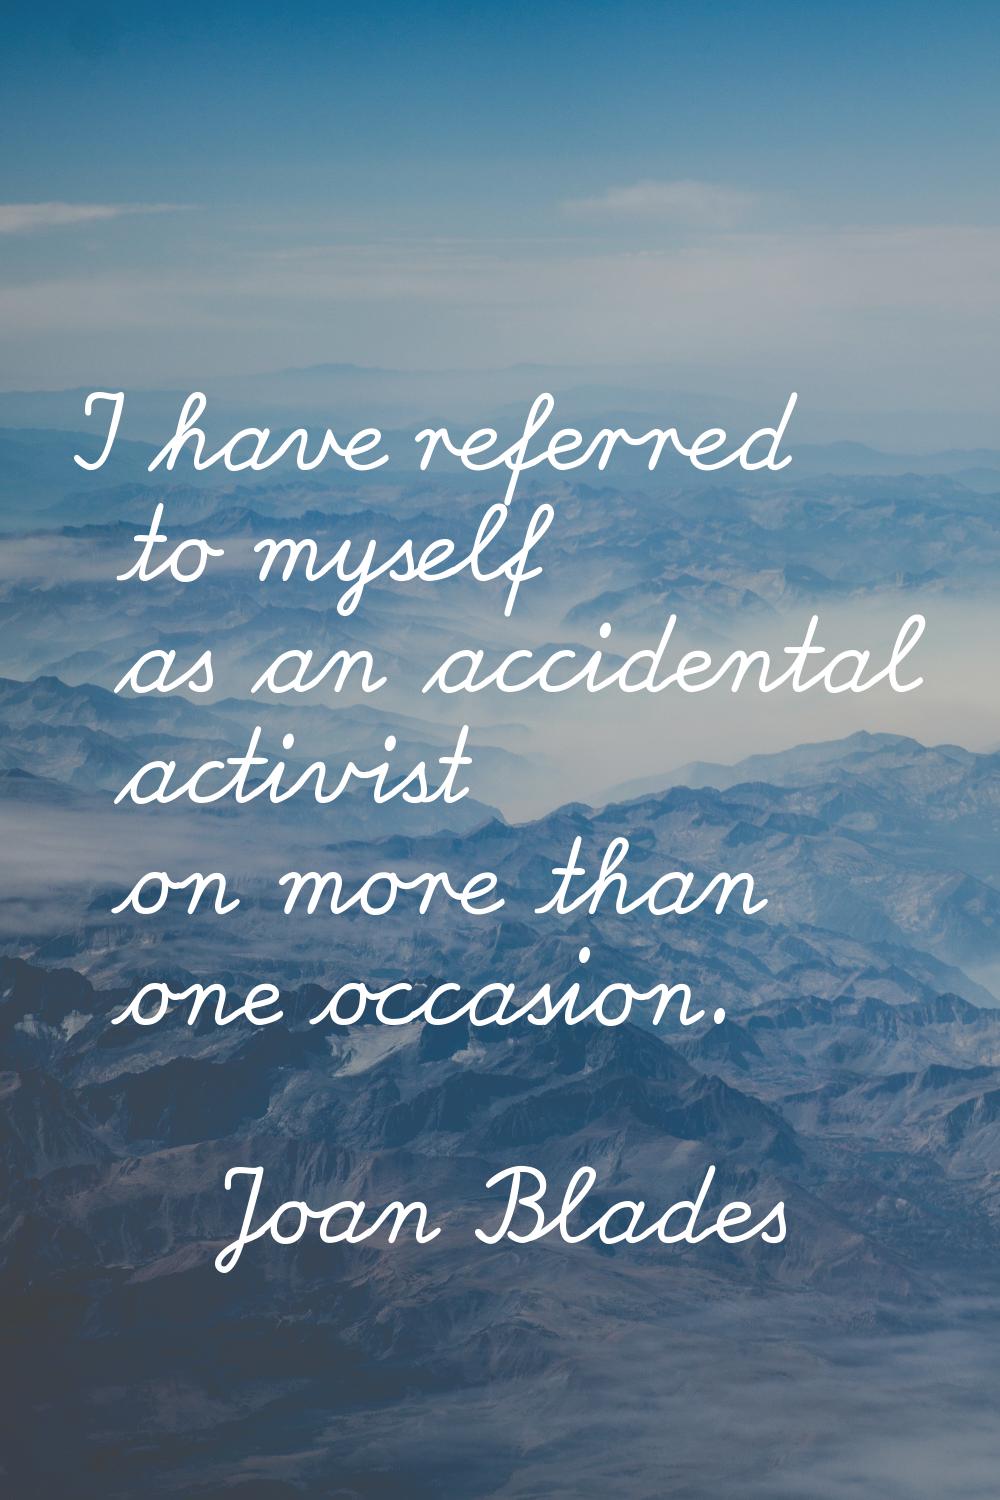 I have referred to myself as an accidental activist on more than one occasion.